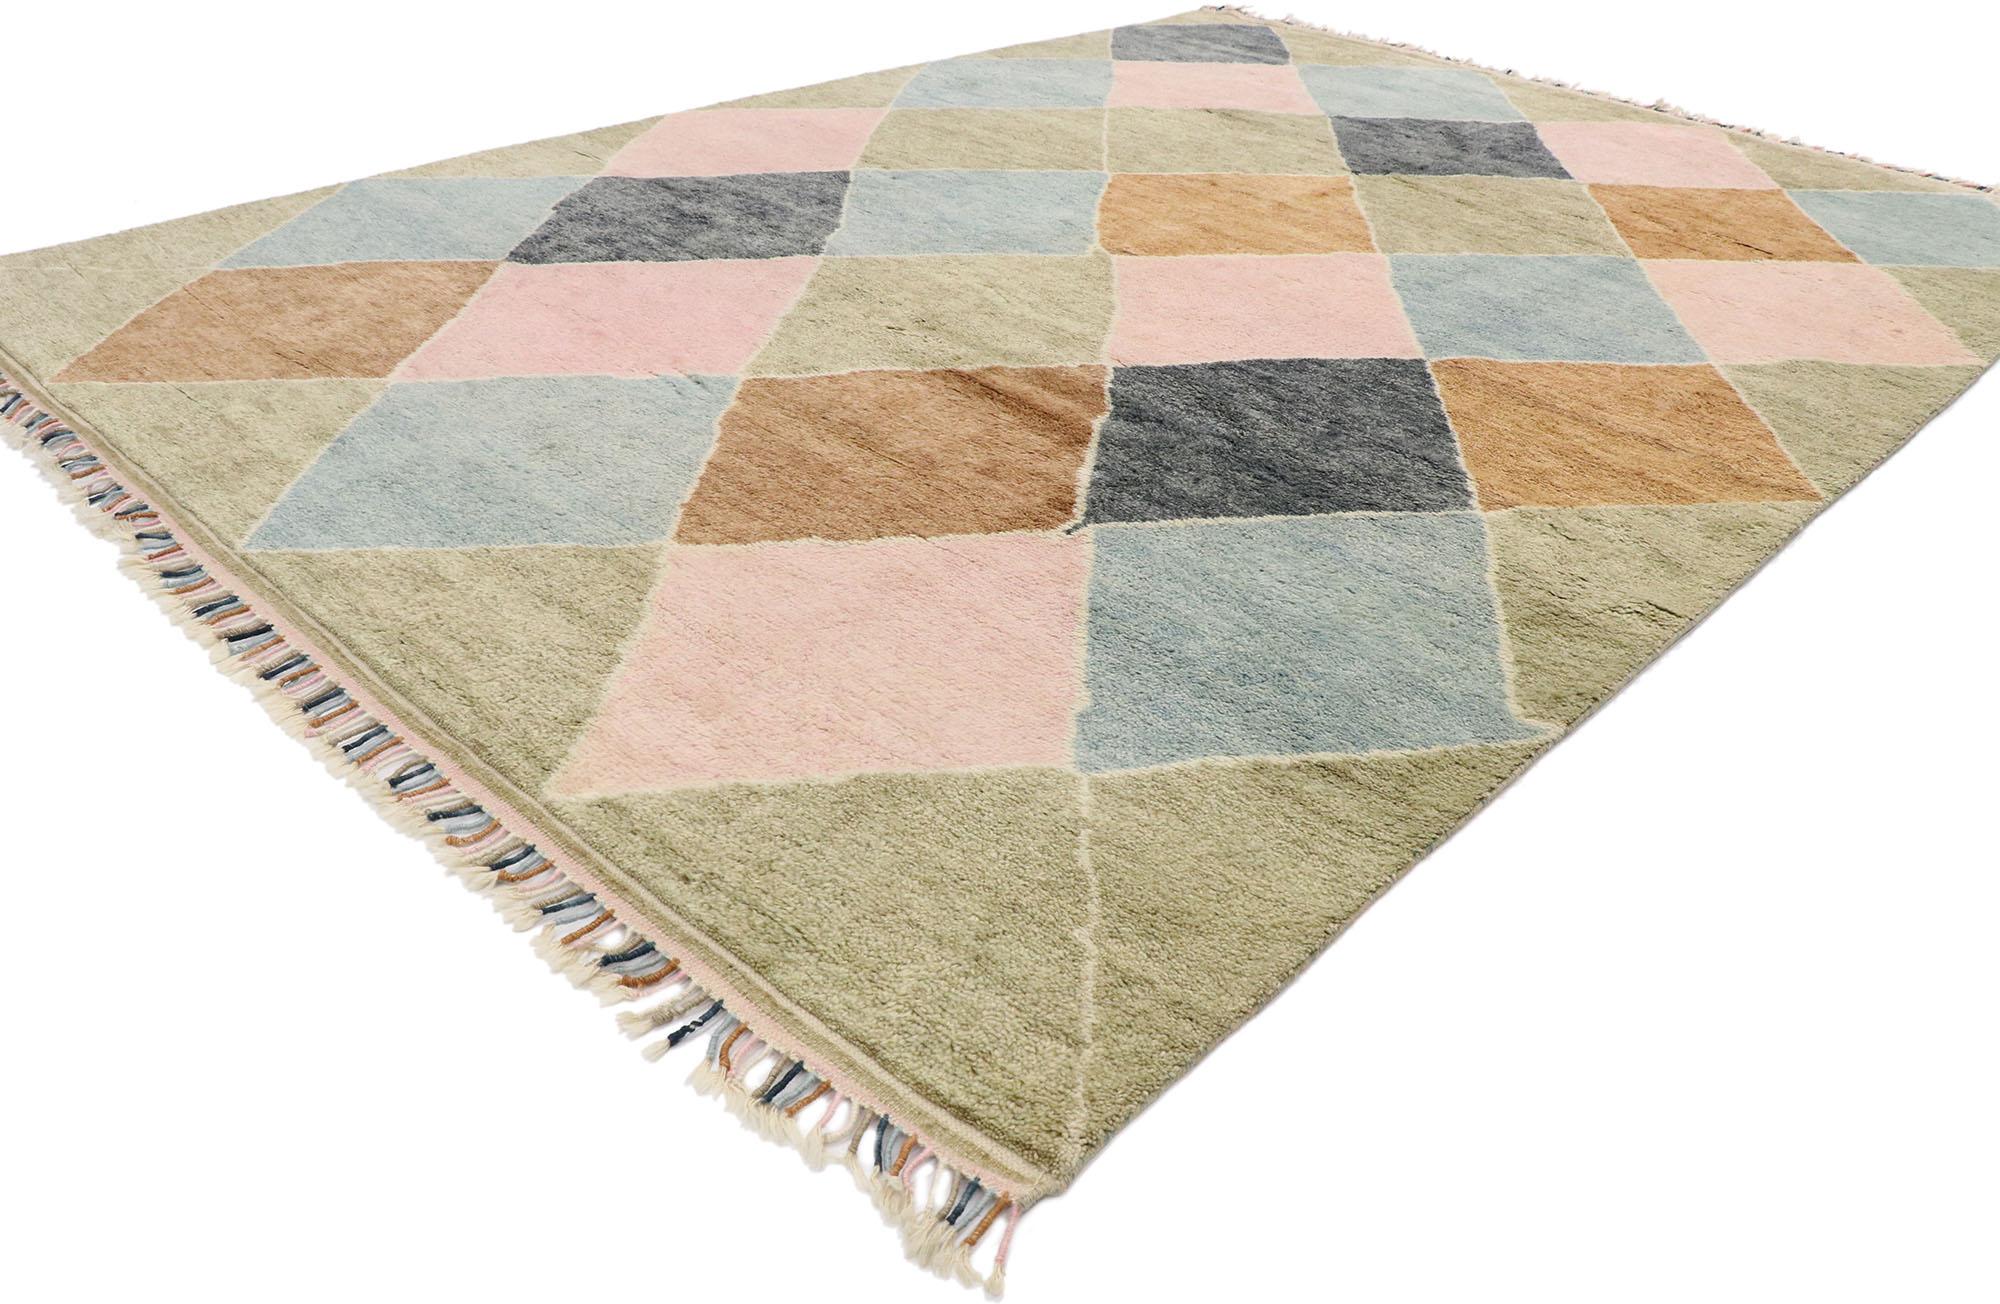 30568 Argyle Style Moroccan Rug, 09'00 x 12'09.
Preppy argyle meets boho chic in this hand knotted wool modern Moroccan rug. The posh diamond pattern and earthy colors woven into this piece work together creating a playful and polished look. A